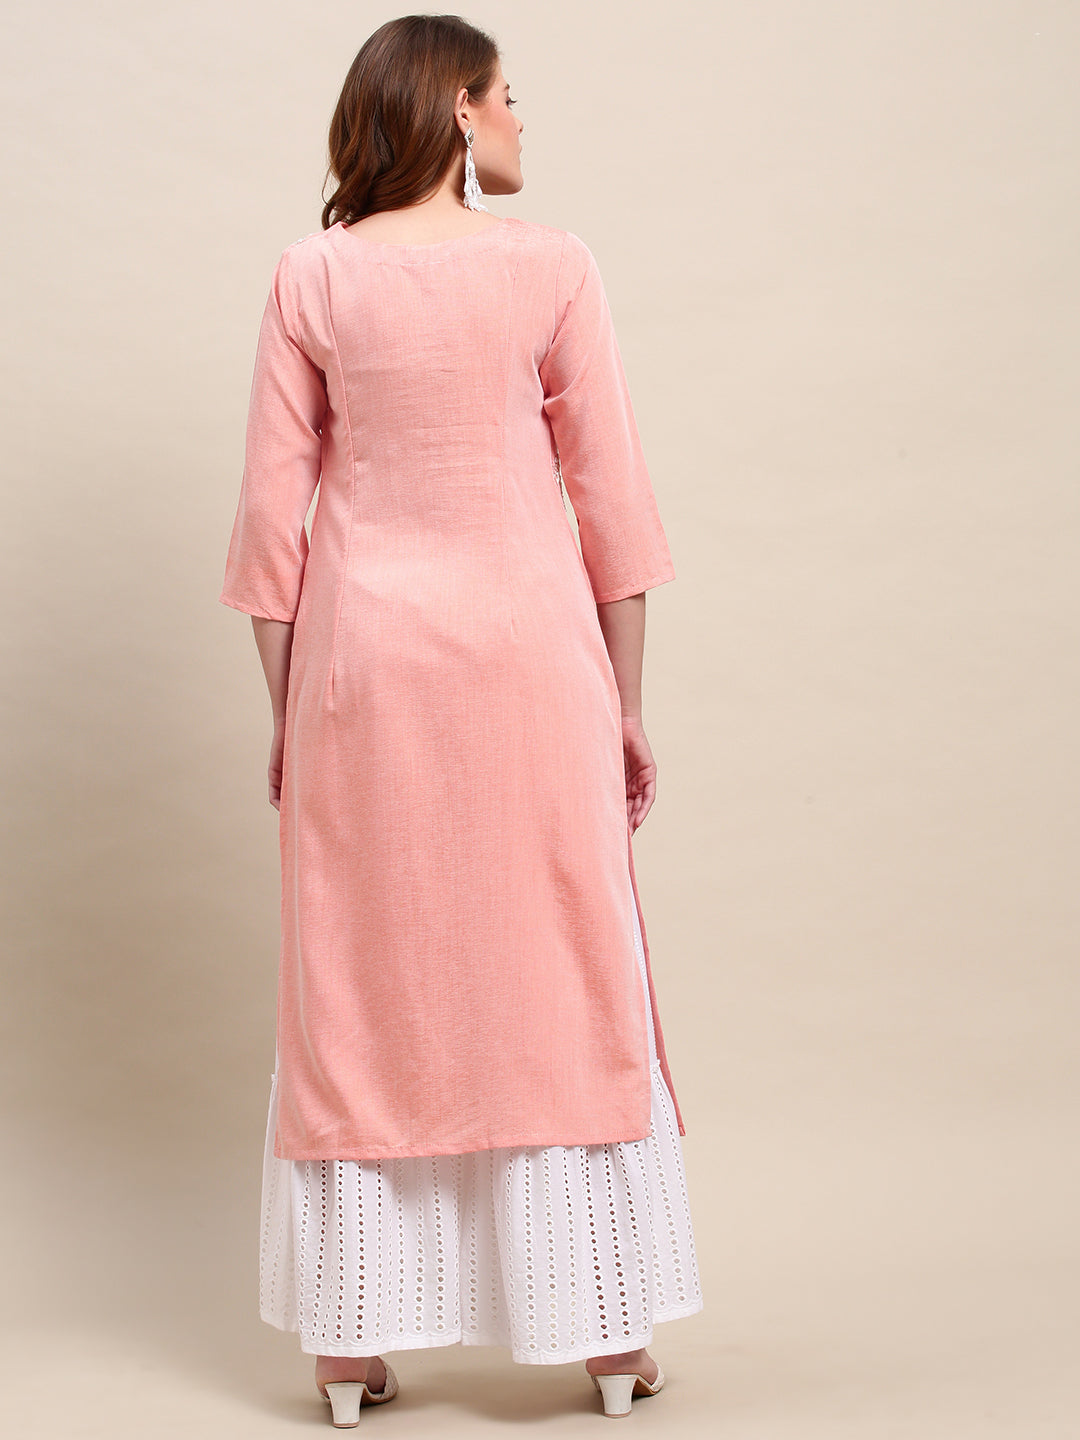 Floral Hand Embroidered Straight Fit Kurta - Peach